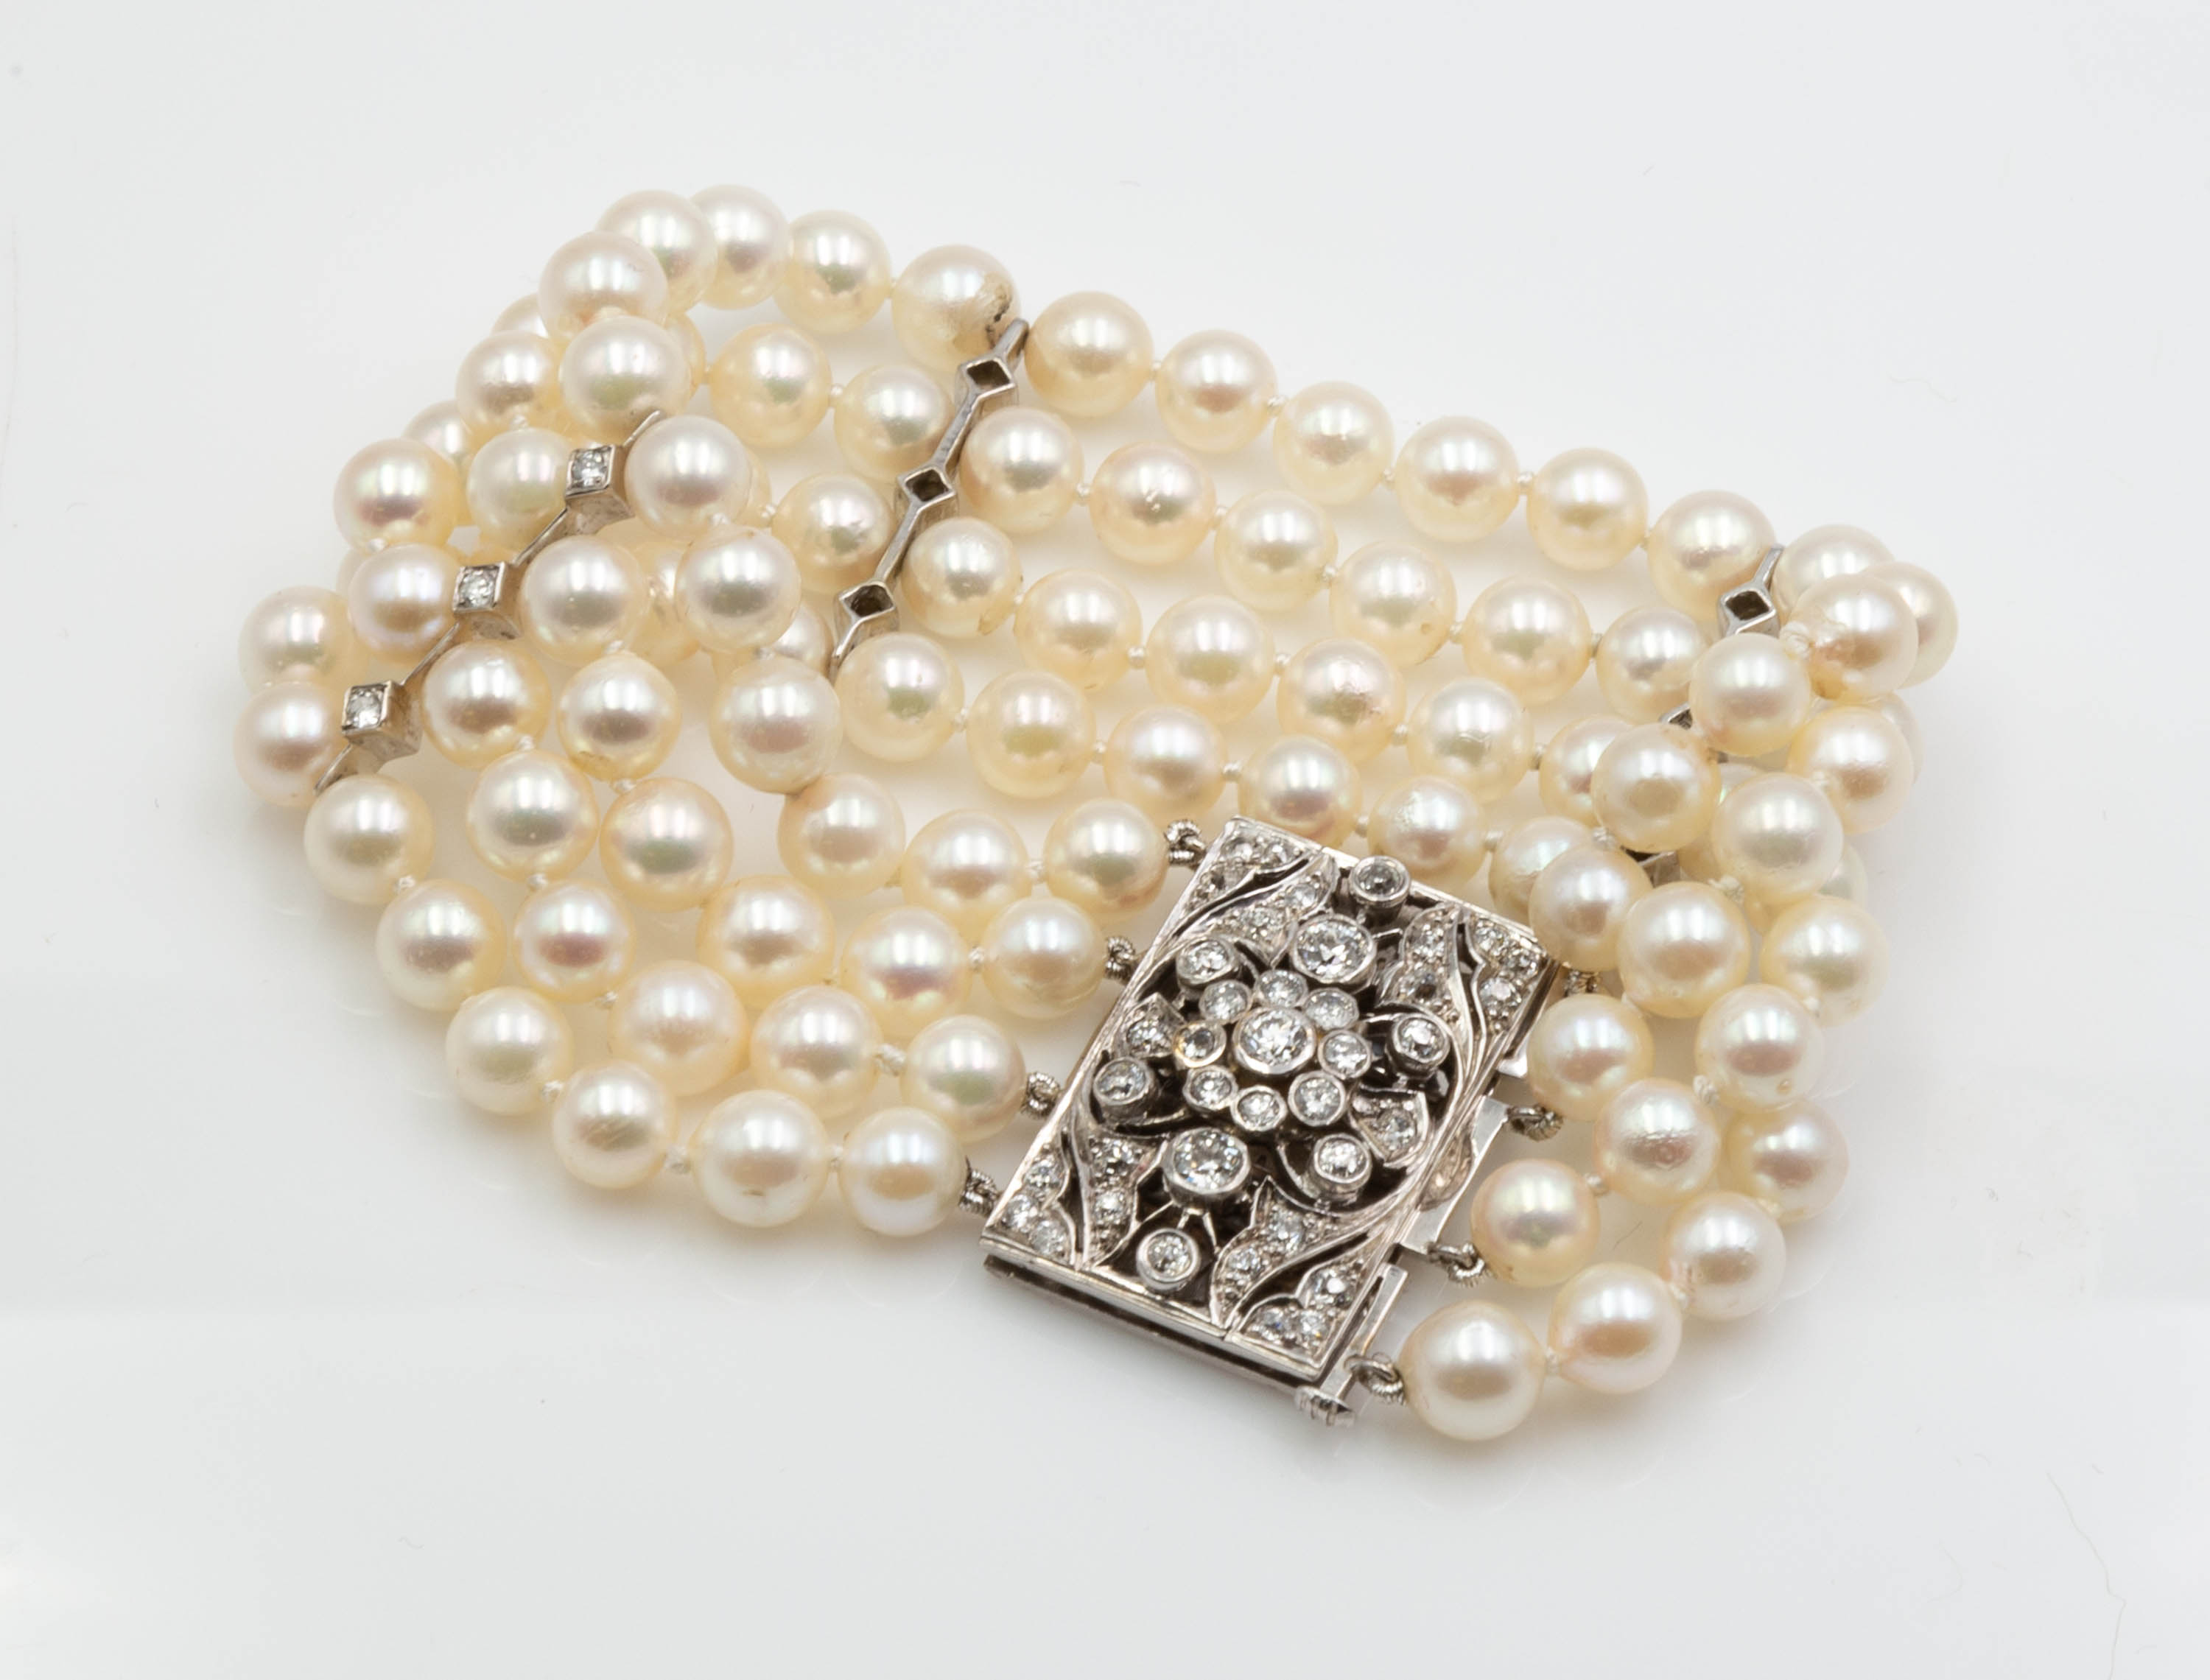 FOUR STRAND PEARL BRACELET WITH 28d581